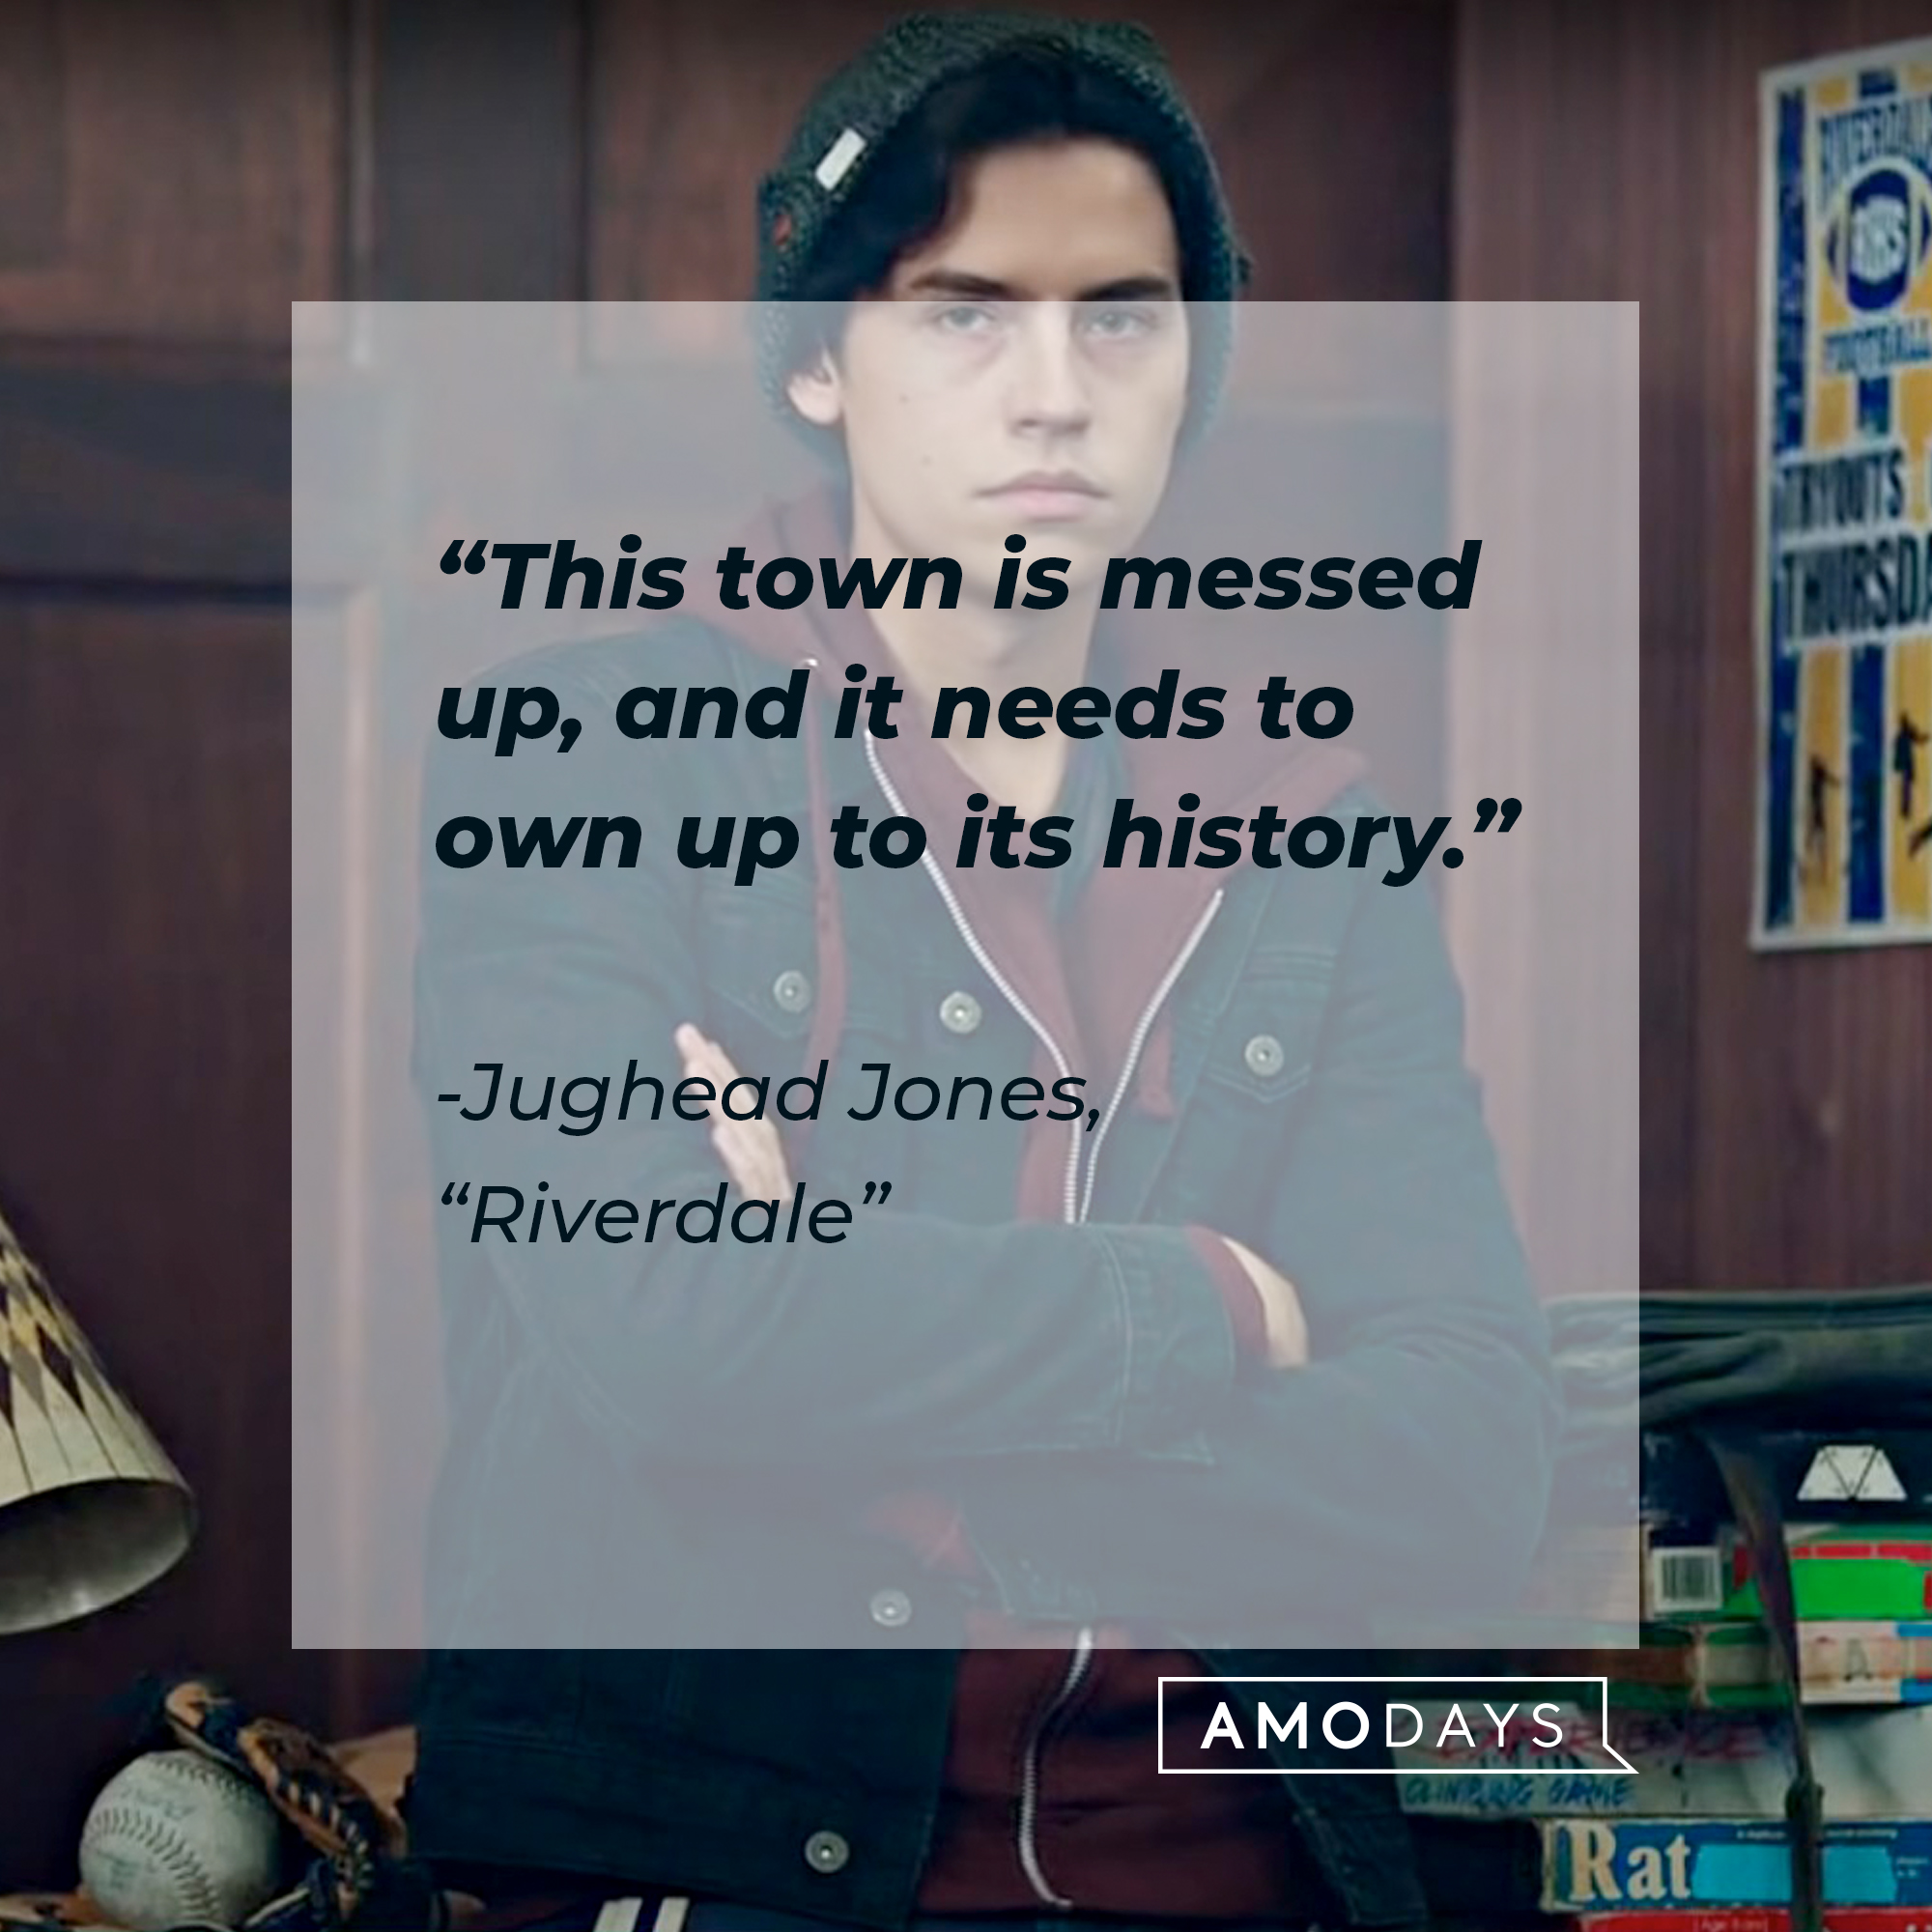 Image of Cole Sprouse as Judhead Jones in "Riverdale" with the quote: “This town is messed up, and it needs to own up to its history.” | Source: facebook.com/Riverdale